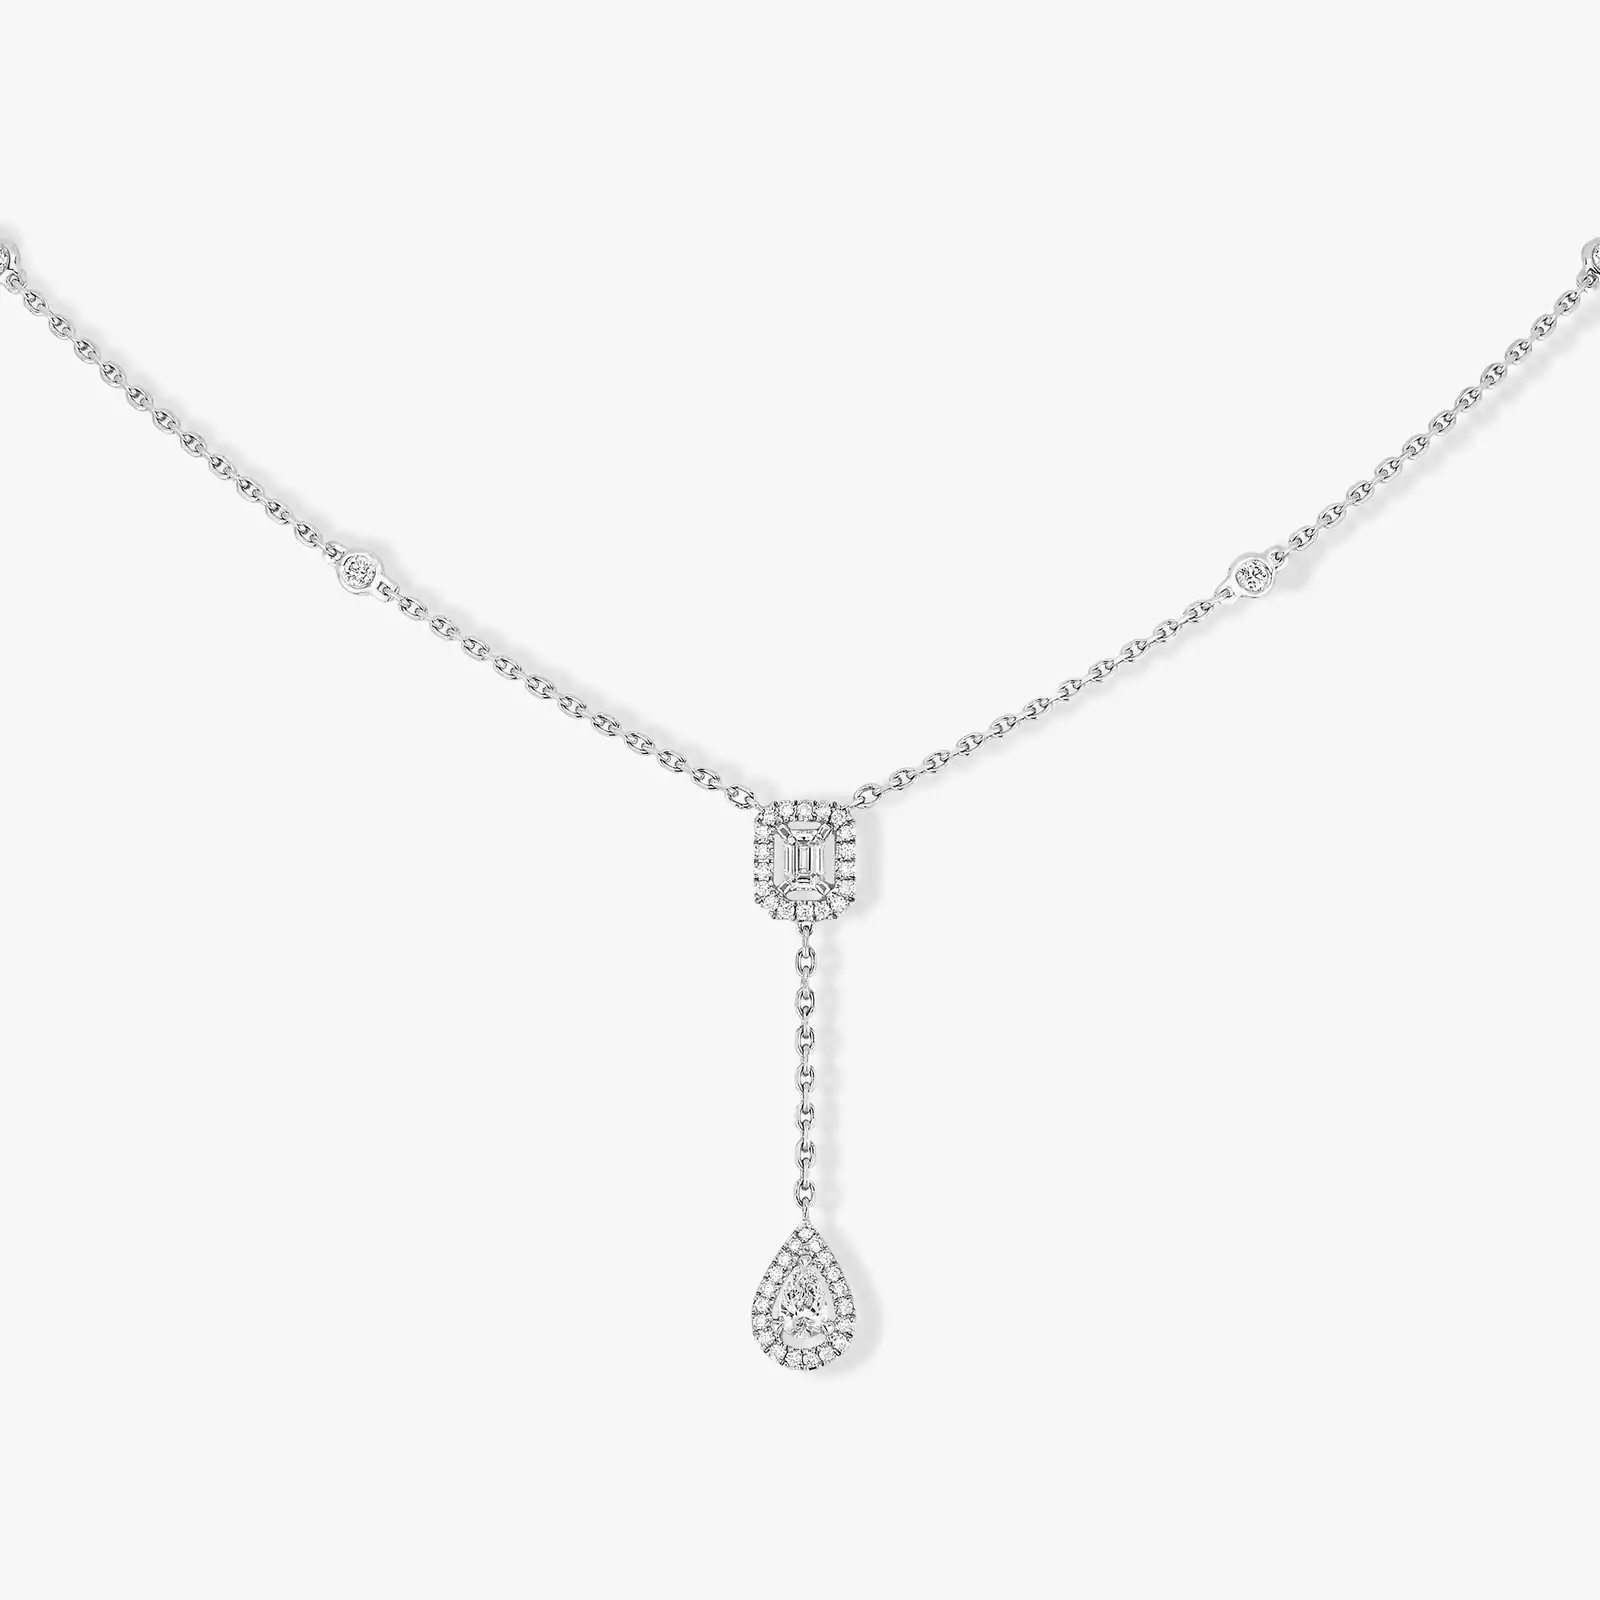 Collier Femme Or Blanc Diamant My Twin Cravate 0,10ct x2 06693-WG